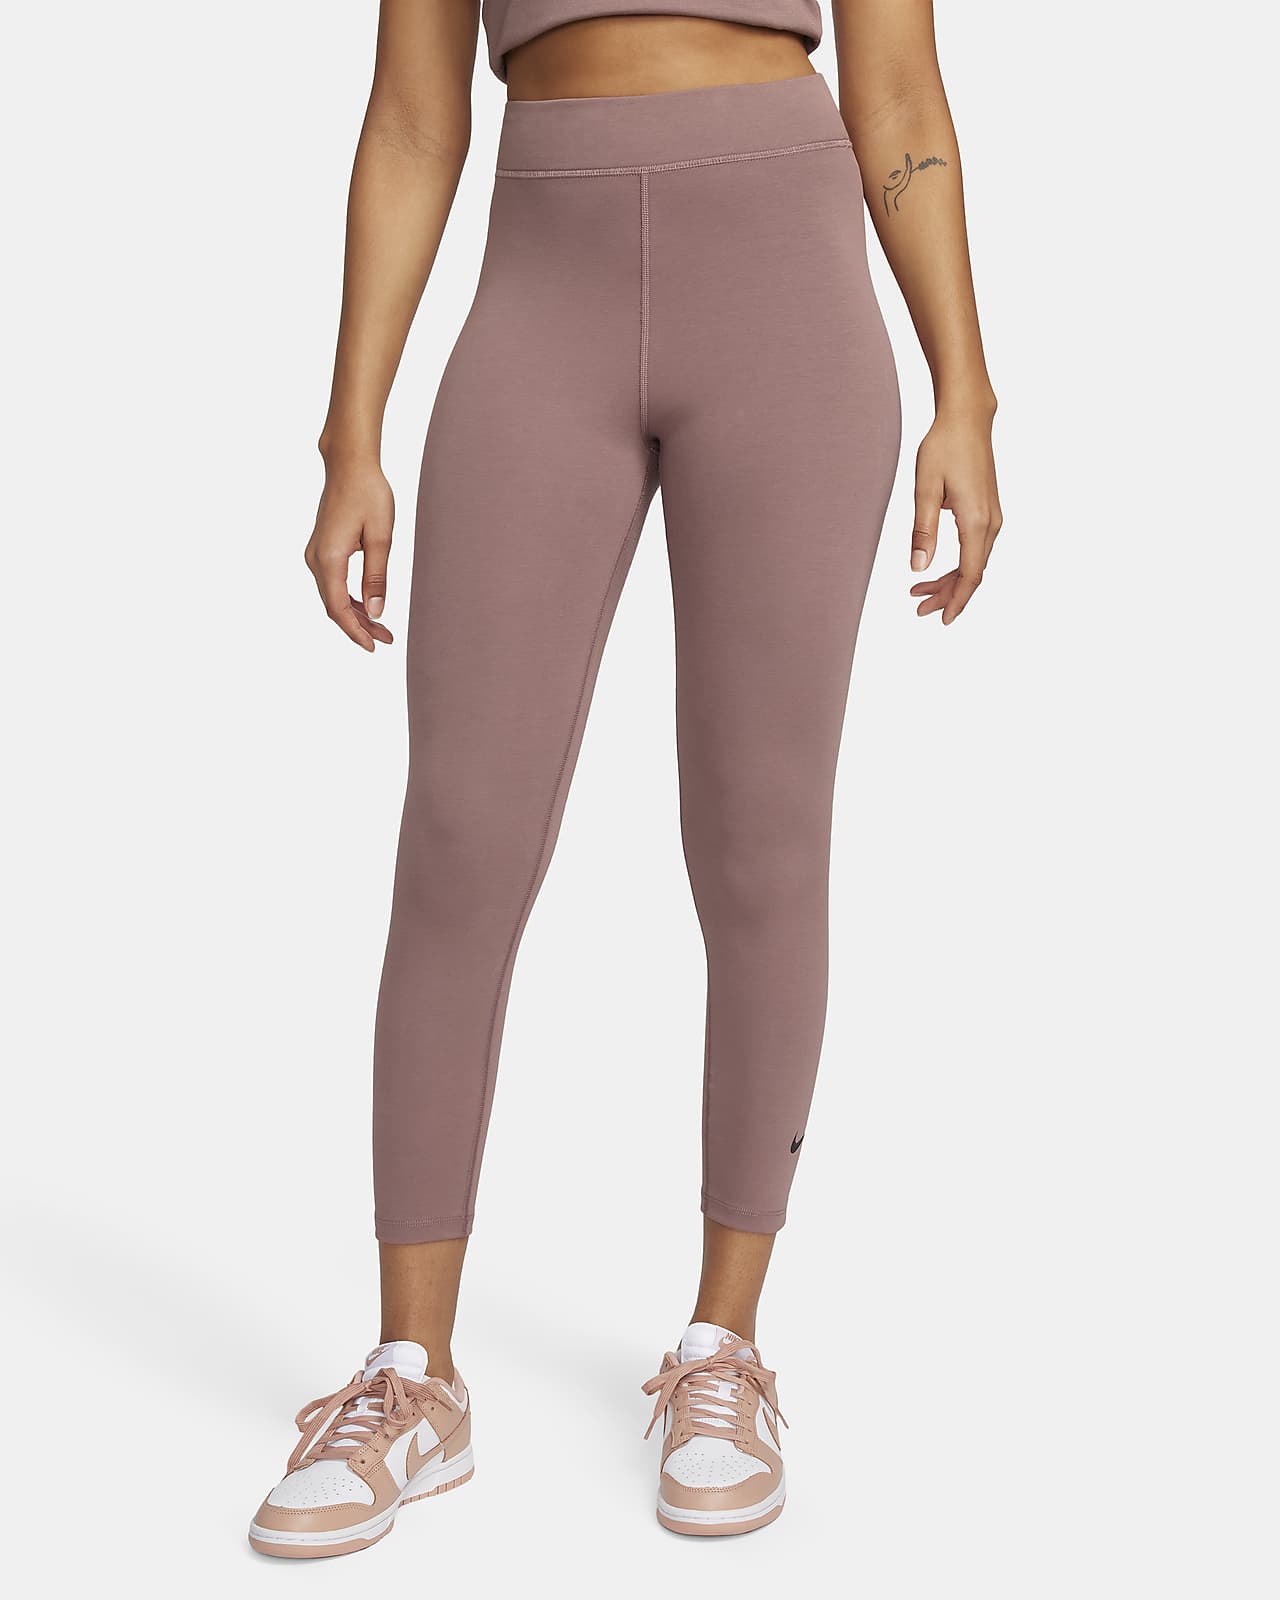 Seamless Leggings High Waist Tight Ass Tights Ms. Fitness Yoga Pants  Sportswear Used in Gym to, Yoga, Running (Color : 4, Size : S) : :  Clothing, Shoes & Accessories